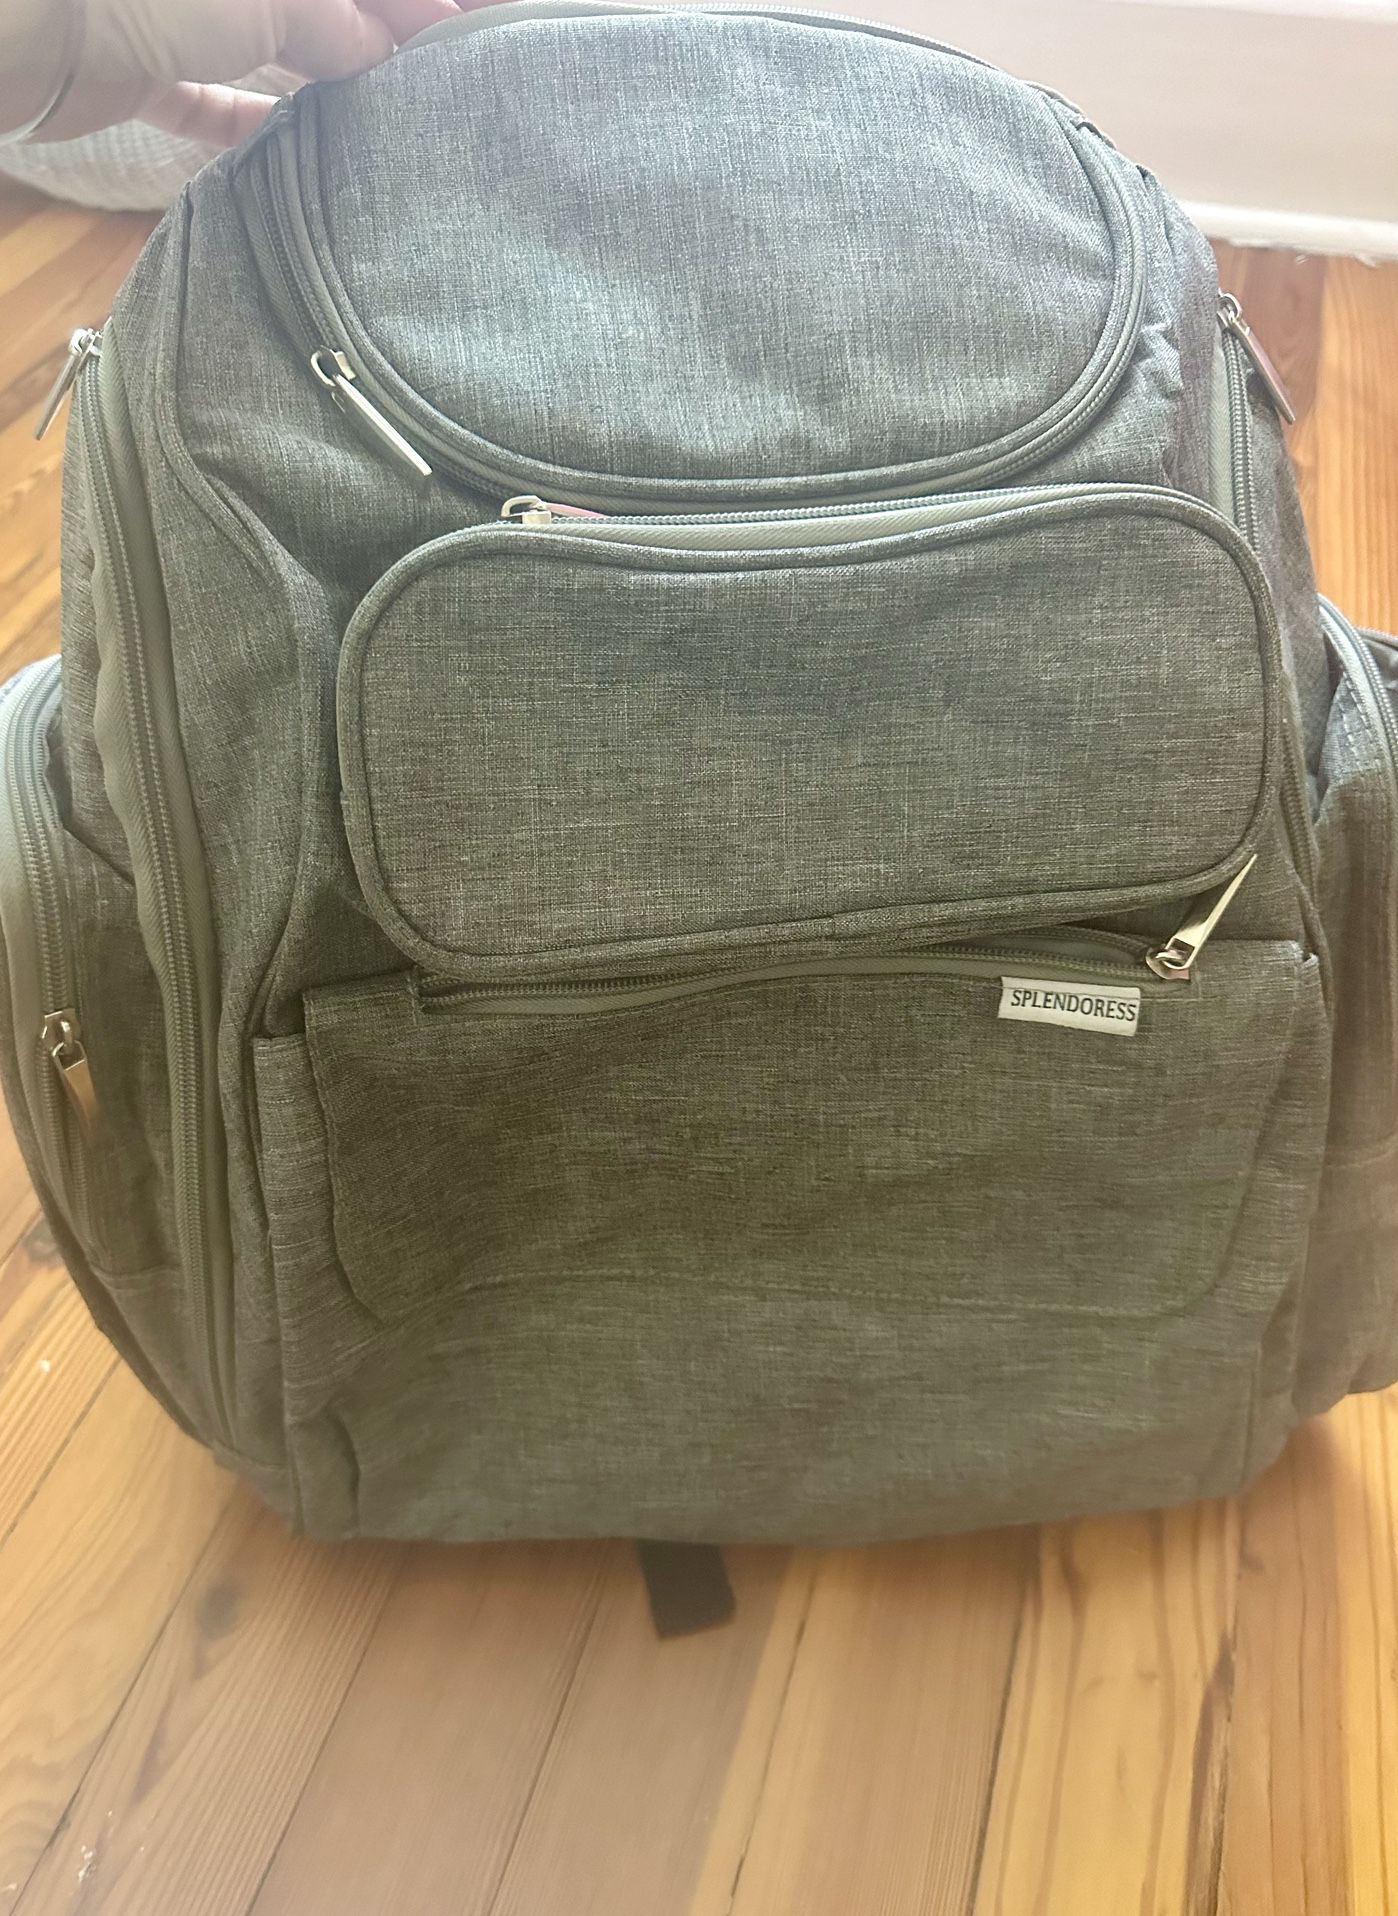 Diaper Bag With Rip On One Of Inner Pockets 